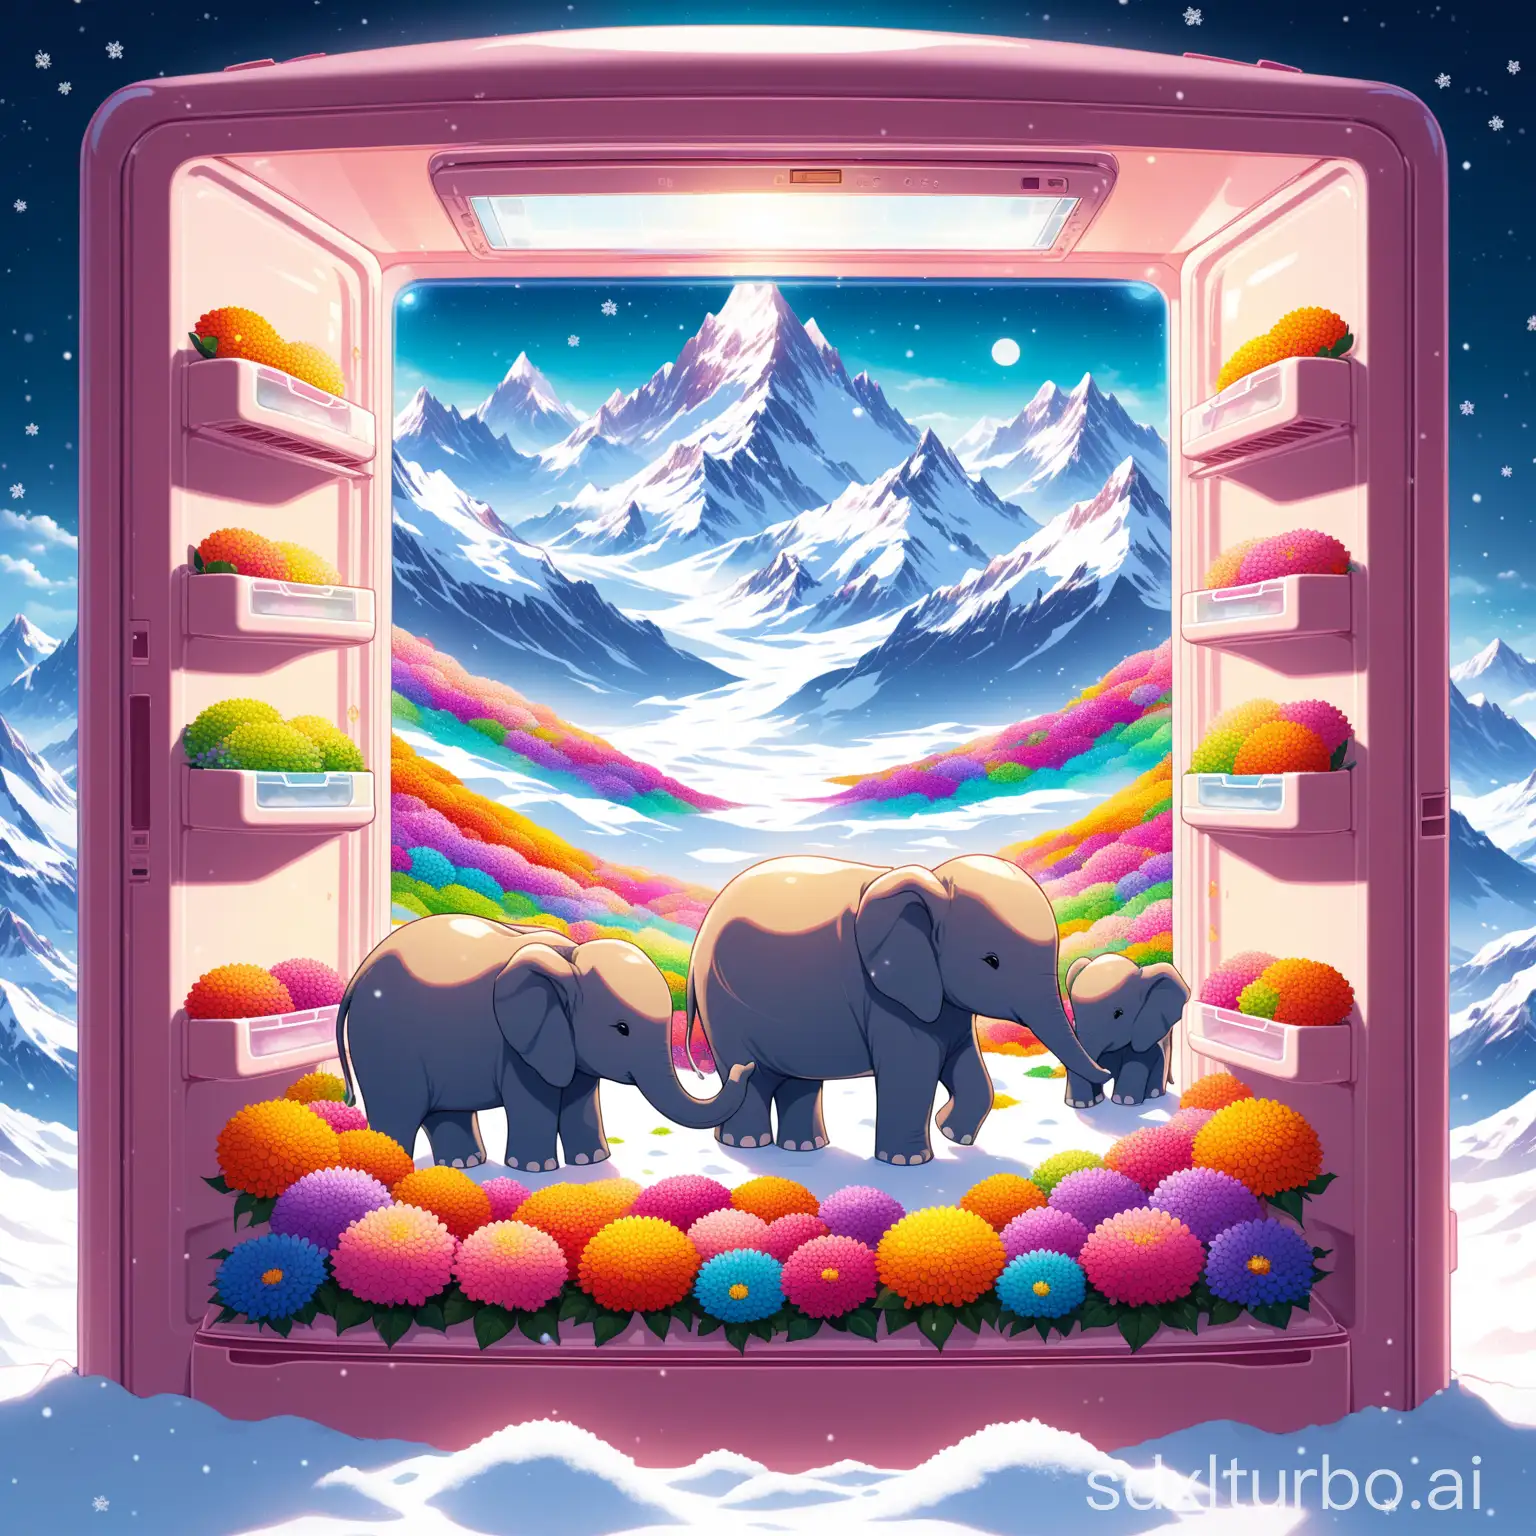 A herd of miniature, adorable elephants gathers inside a refrigerator, surrounded by a vibrant array of flowers. Within the depths of this appliance, snow-capped mountains rise majestically, creating an otherworldly scene reminiscent of a fantastical realm.